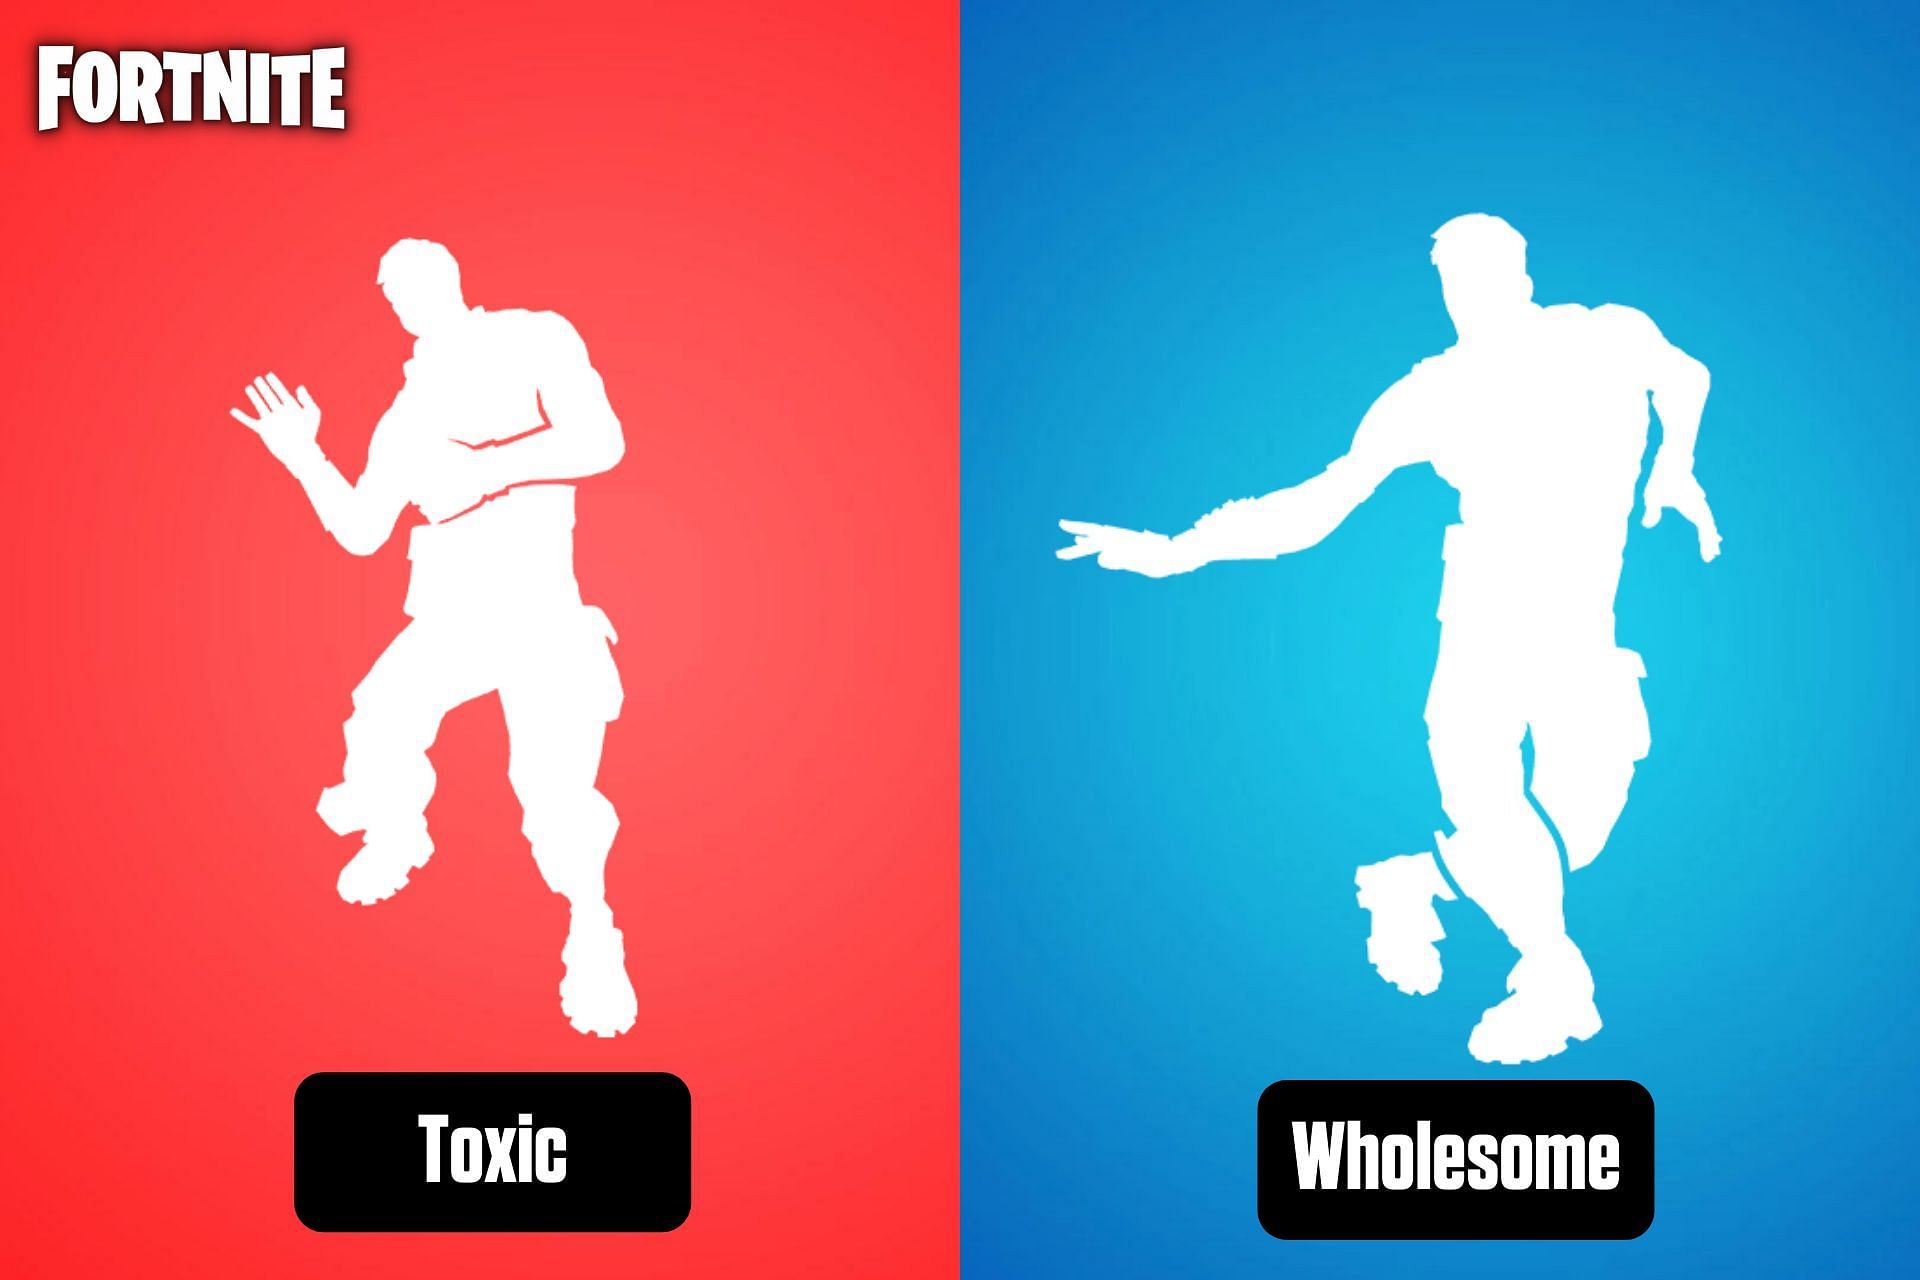 Some Fortnite emotes are toxic, while others are as wholesome as they get (Image via Sportskeeda)